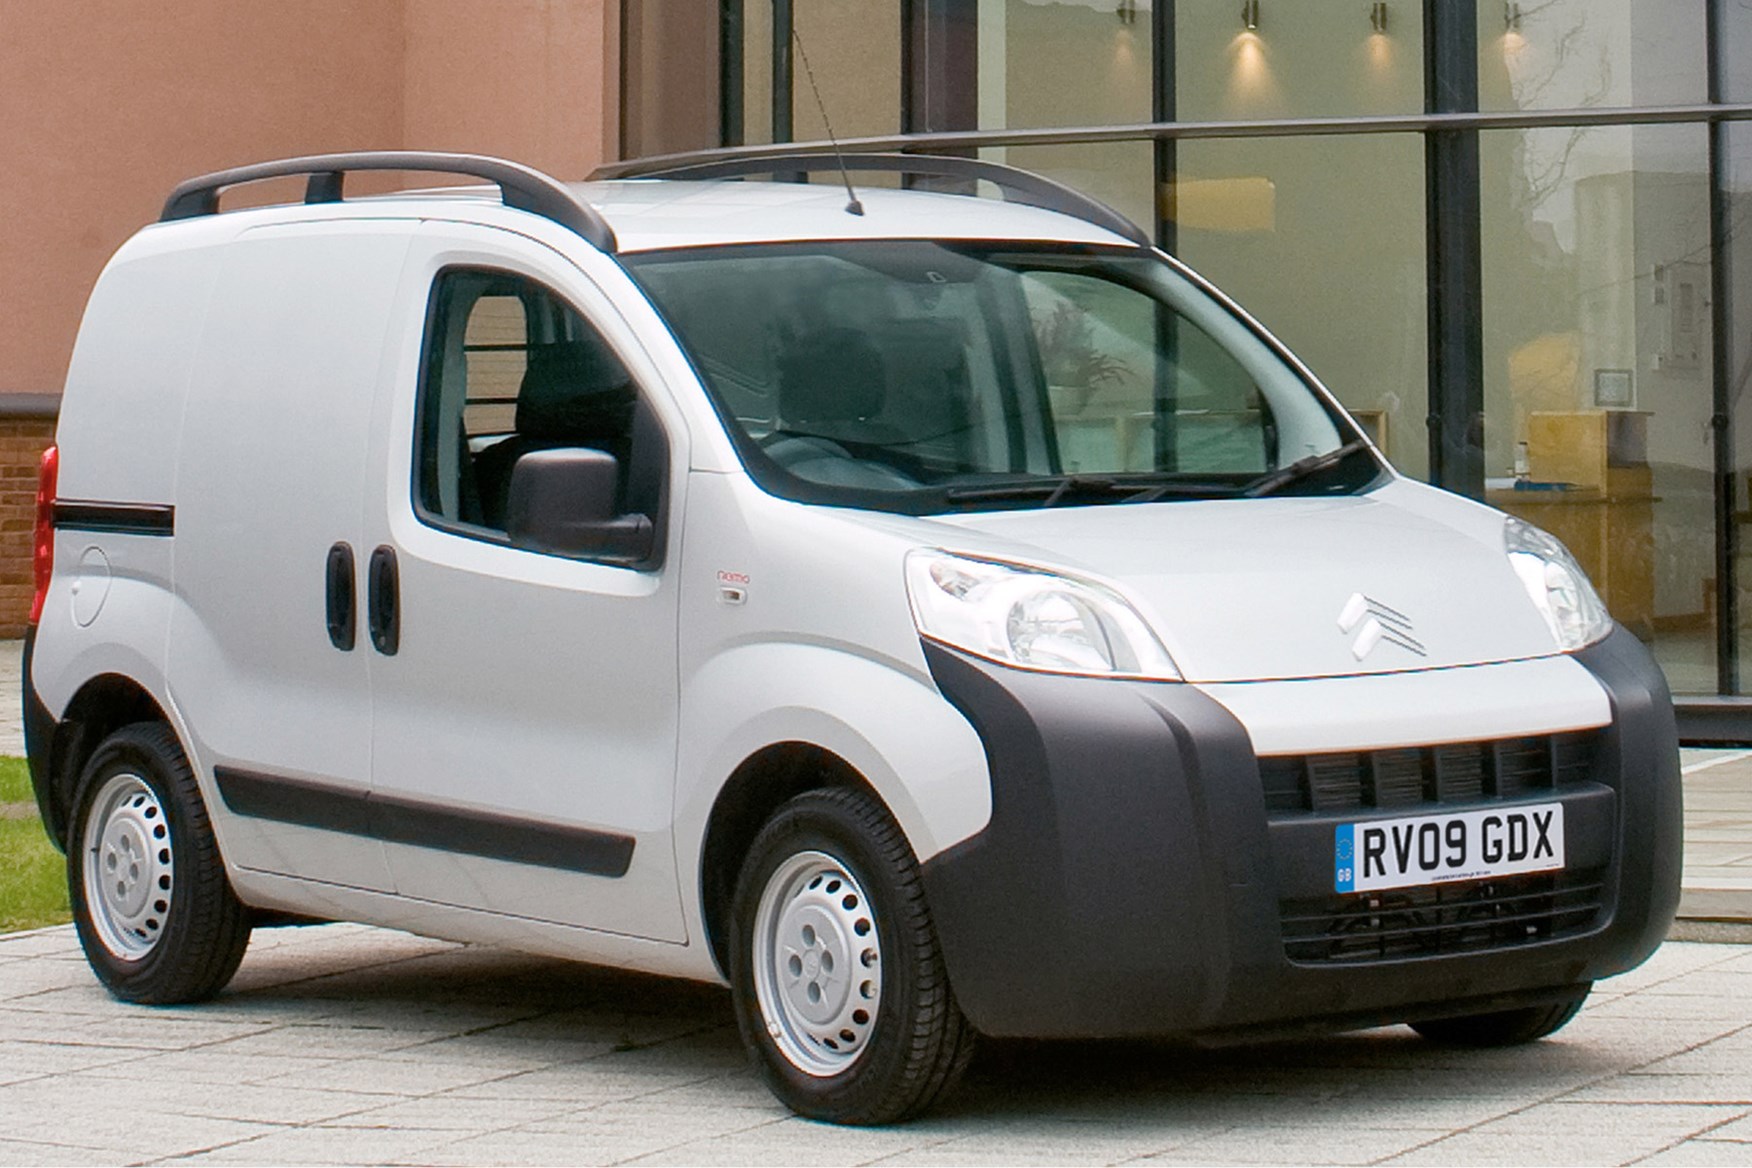 Citroen Nemo review and buying guide - silver, front view